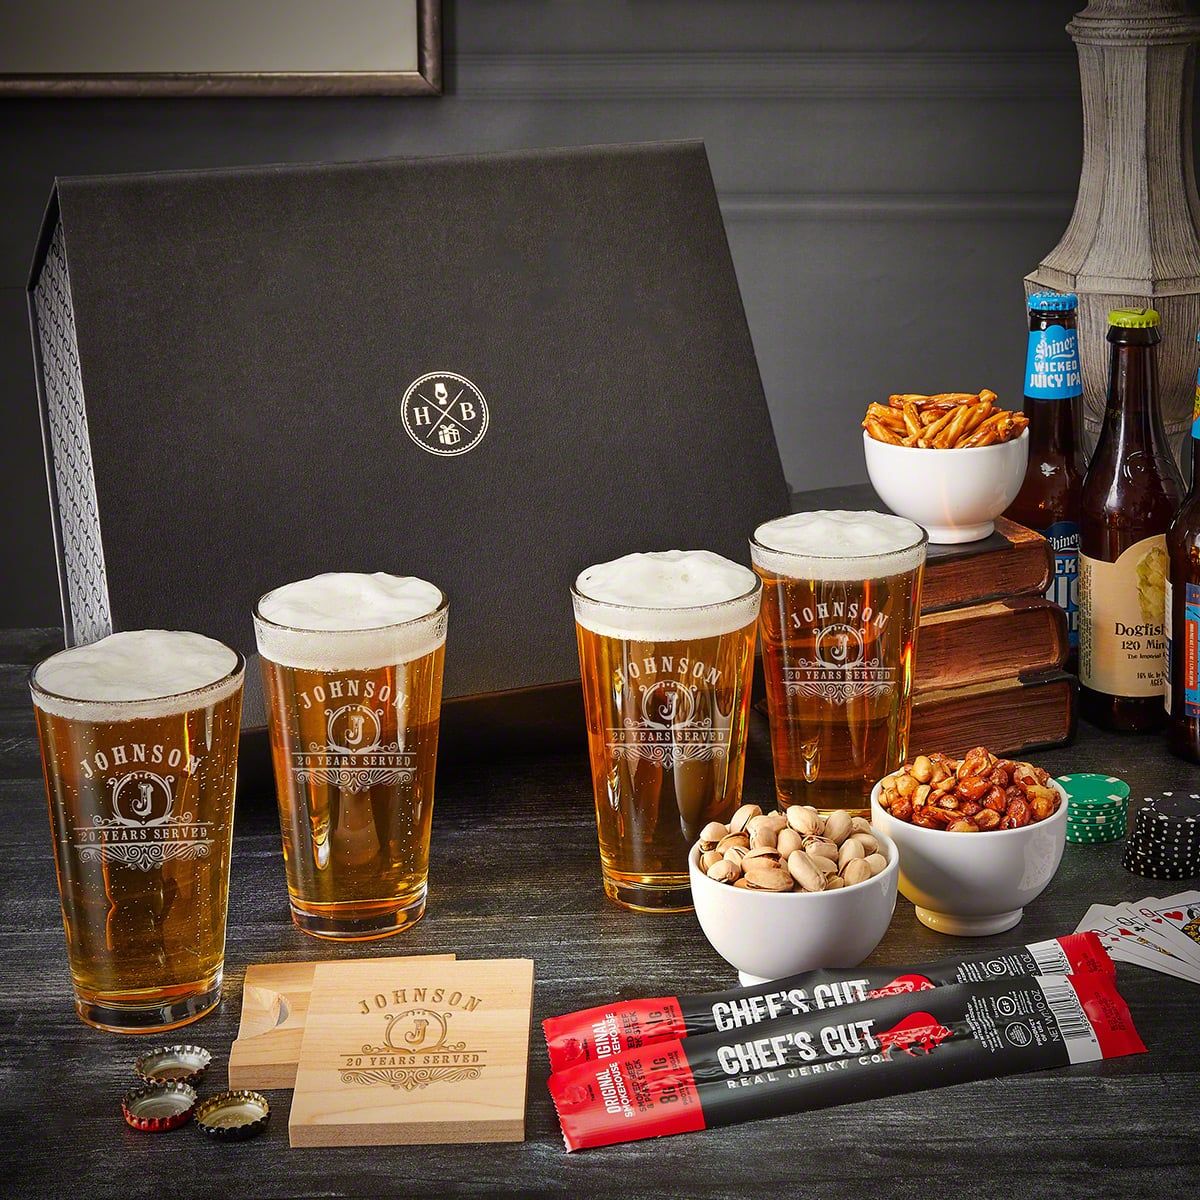 https://images.homewetbar.com/media/catalog/product/4/-/4-pint-glass-luxury-box-set-with-snacks-and-bottle-opener-coasters-carraway-p_10757_1_.jpg?store=default&image-type=image